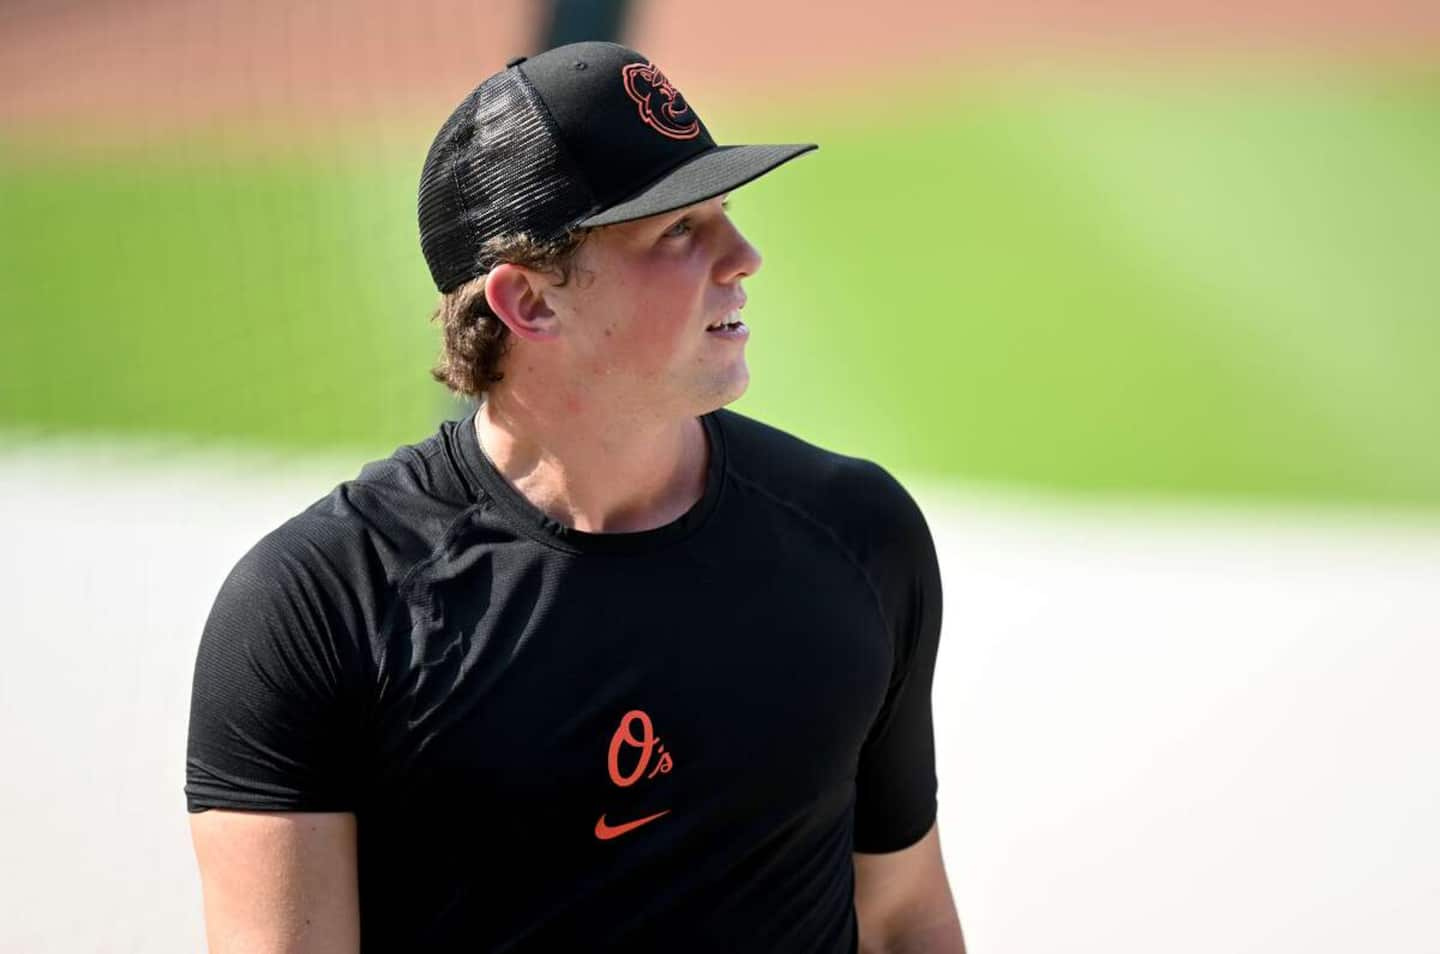 Major League Baseball's top prospect recalled by the Orioles